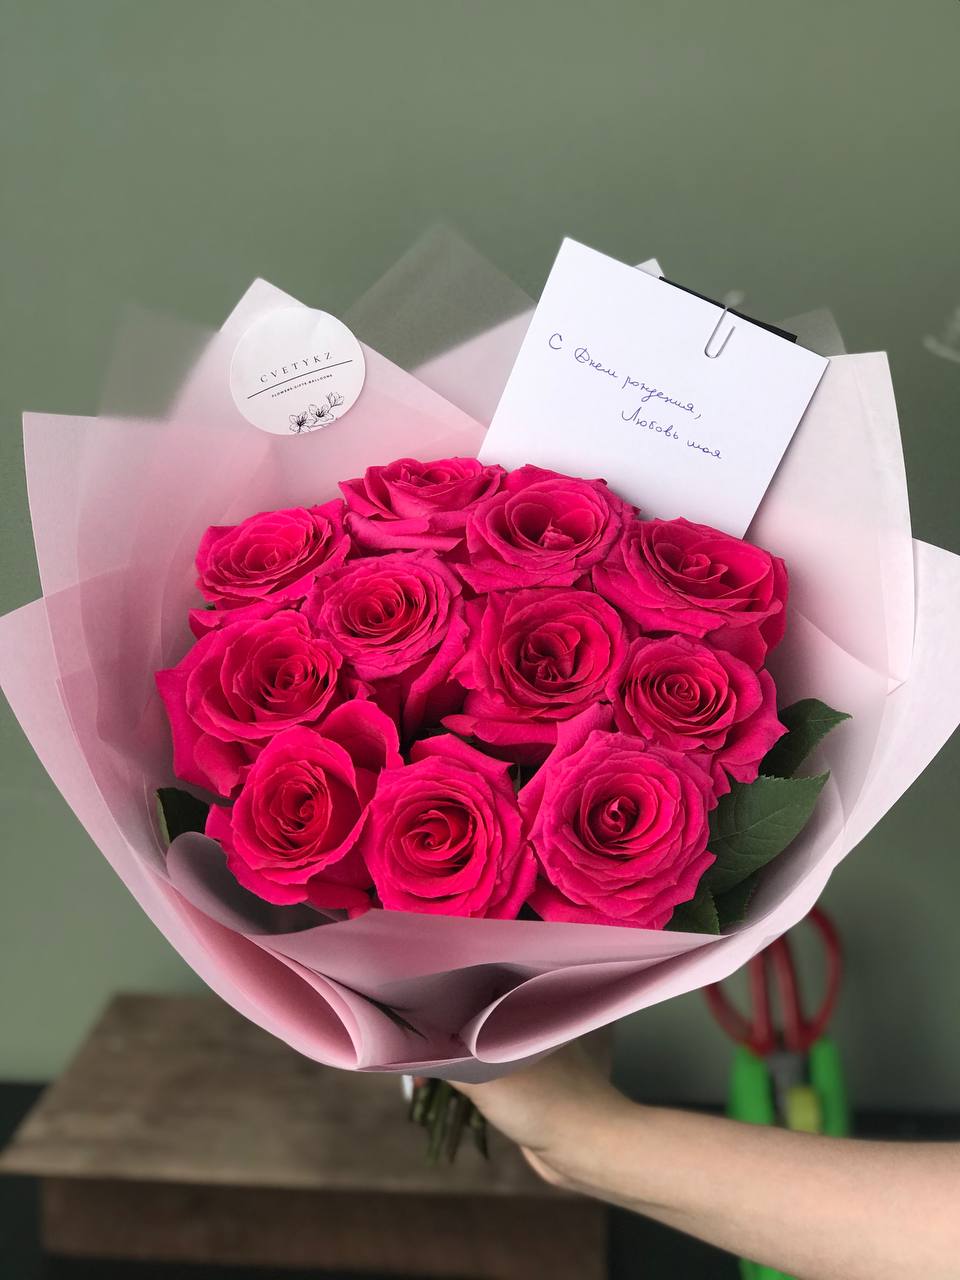 11 Roses (color to the florist's taste)